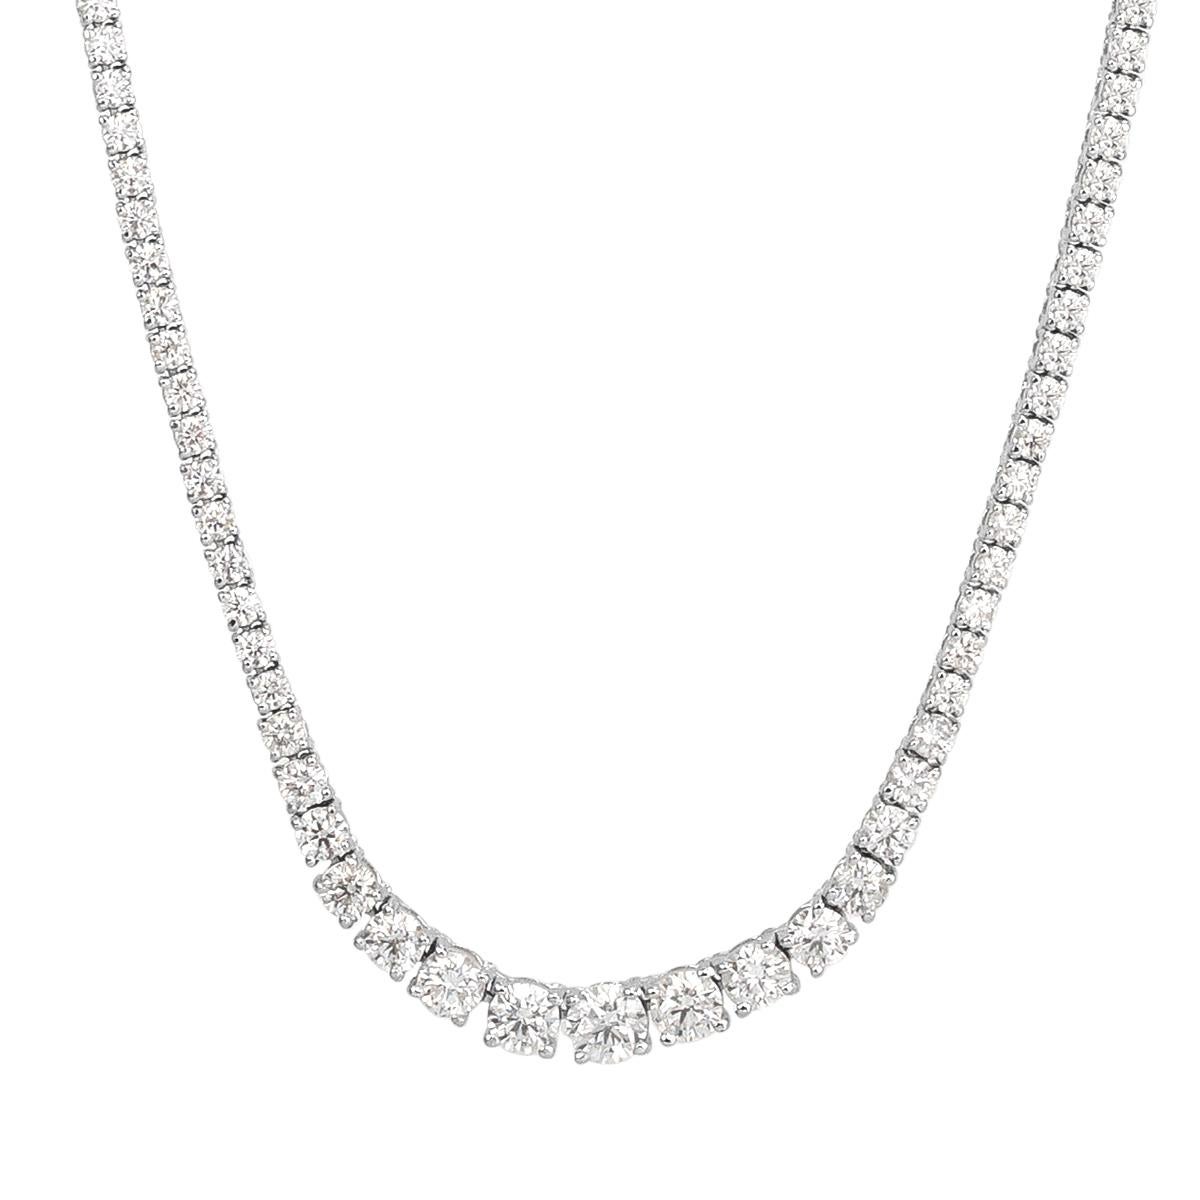 This gorgeous diamond tennis necklace showcases 6.65ct of exceptionally bright round brilliant cut diamonds graded at top colors of G-H and SI1-SI2 clarities. They are set in a classic 18k white gold, graduated setting style. Truly elegant and